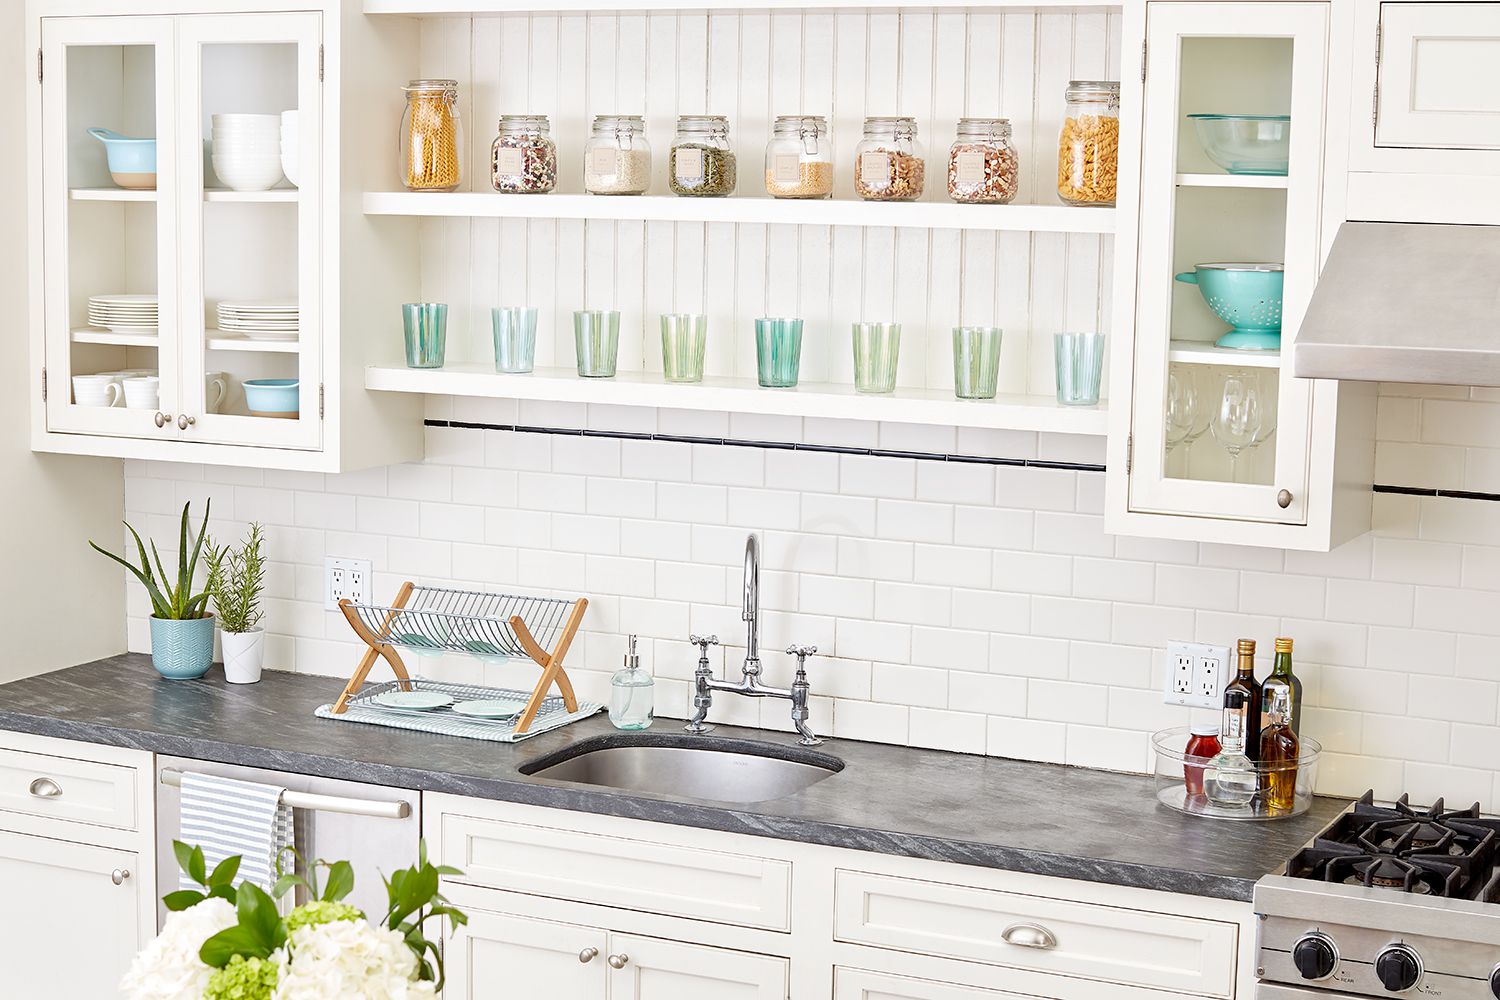 Kitchen Cabinets: The Best Trends to Keep an Eye on in 2022!